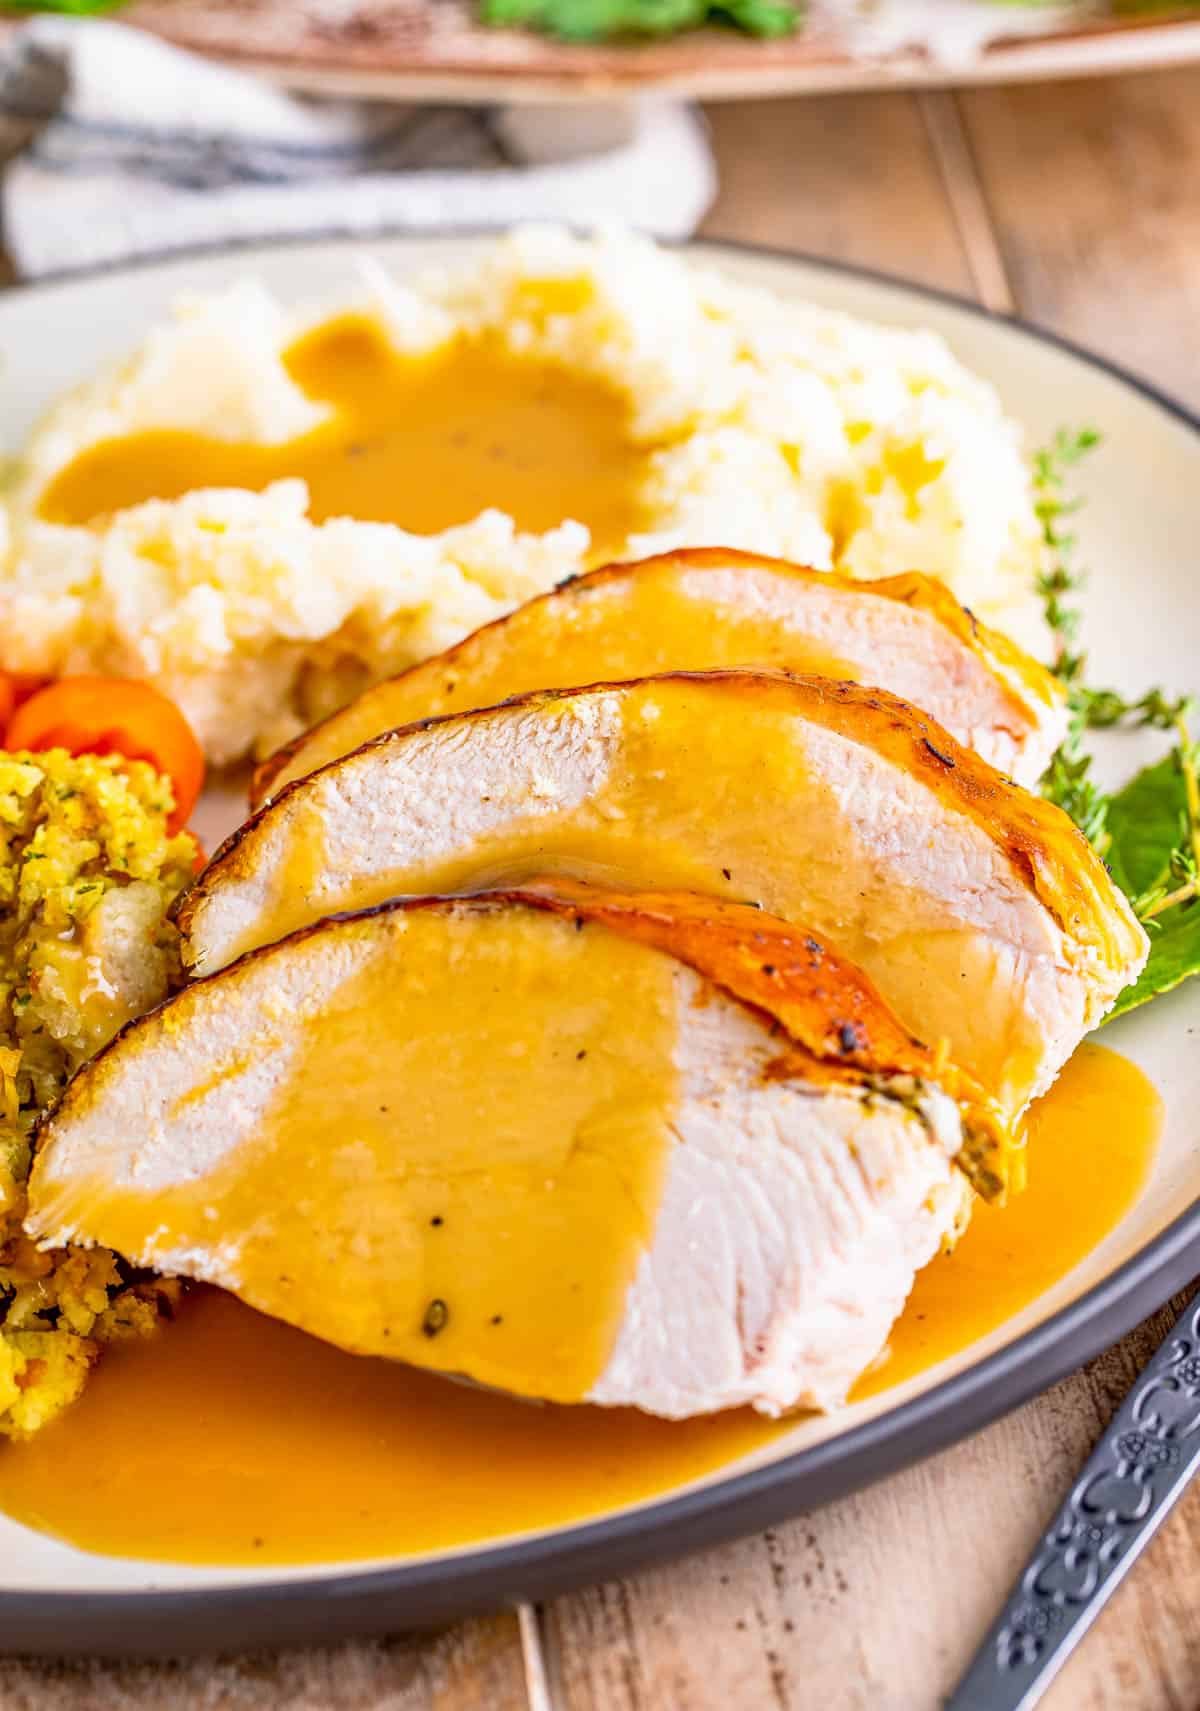 Sliced up Roasted Turkey Recipe on plate close up with gravy and sides.